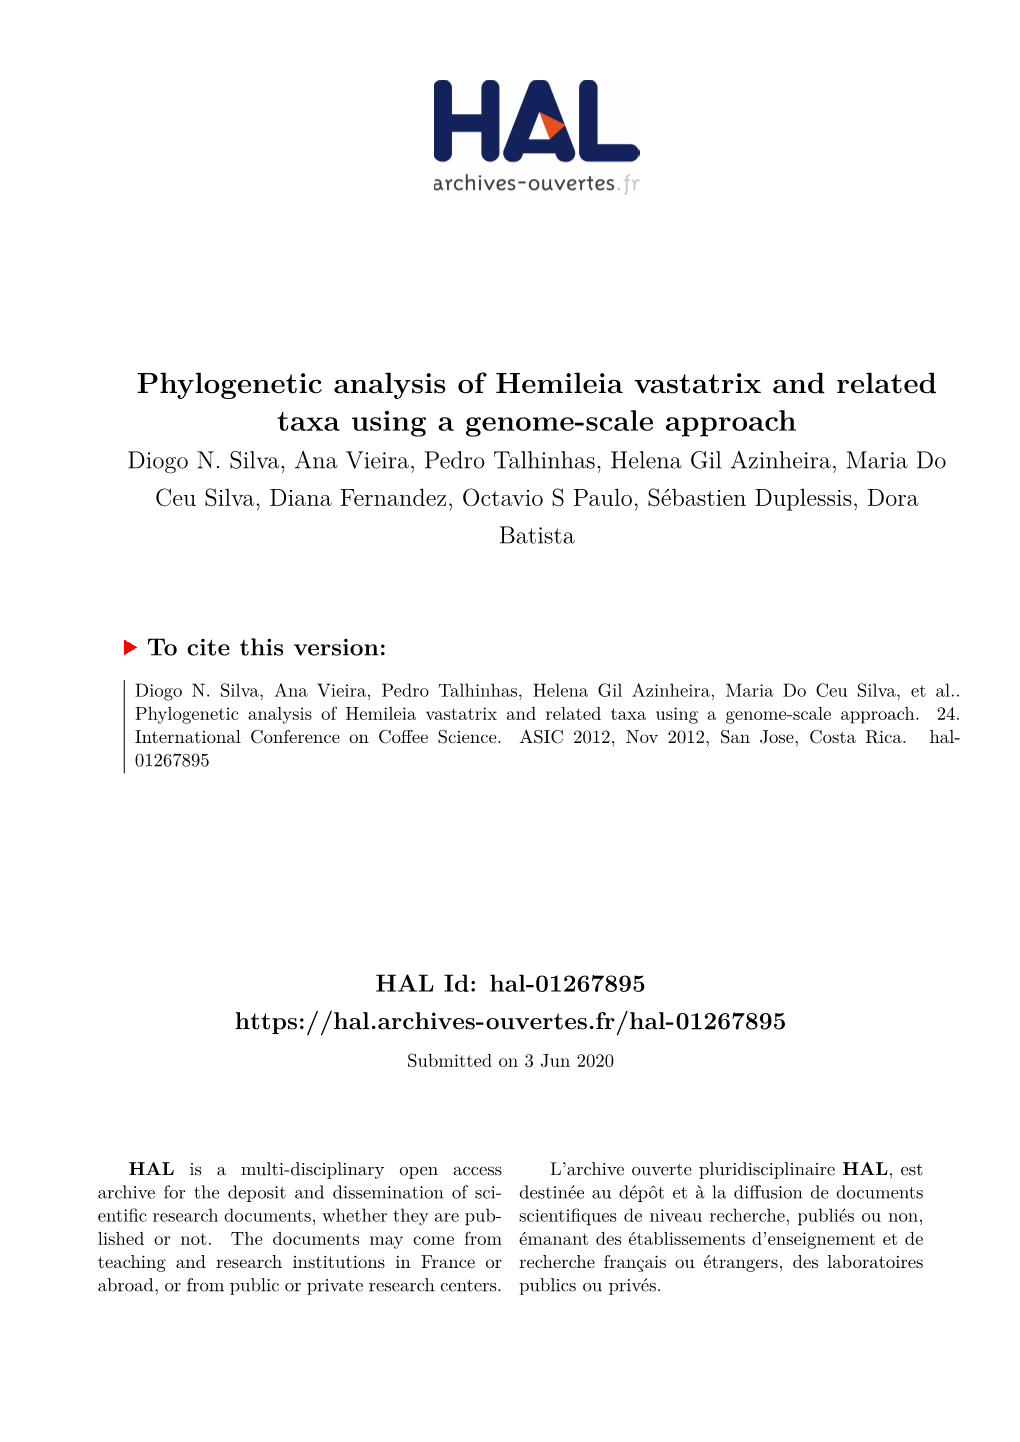 Phylogenetic Analysis of Hemileia Vastatrix and Related Taxa Using a Genome-Scale Approach Diogo N